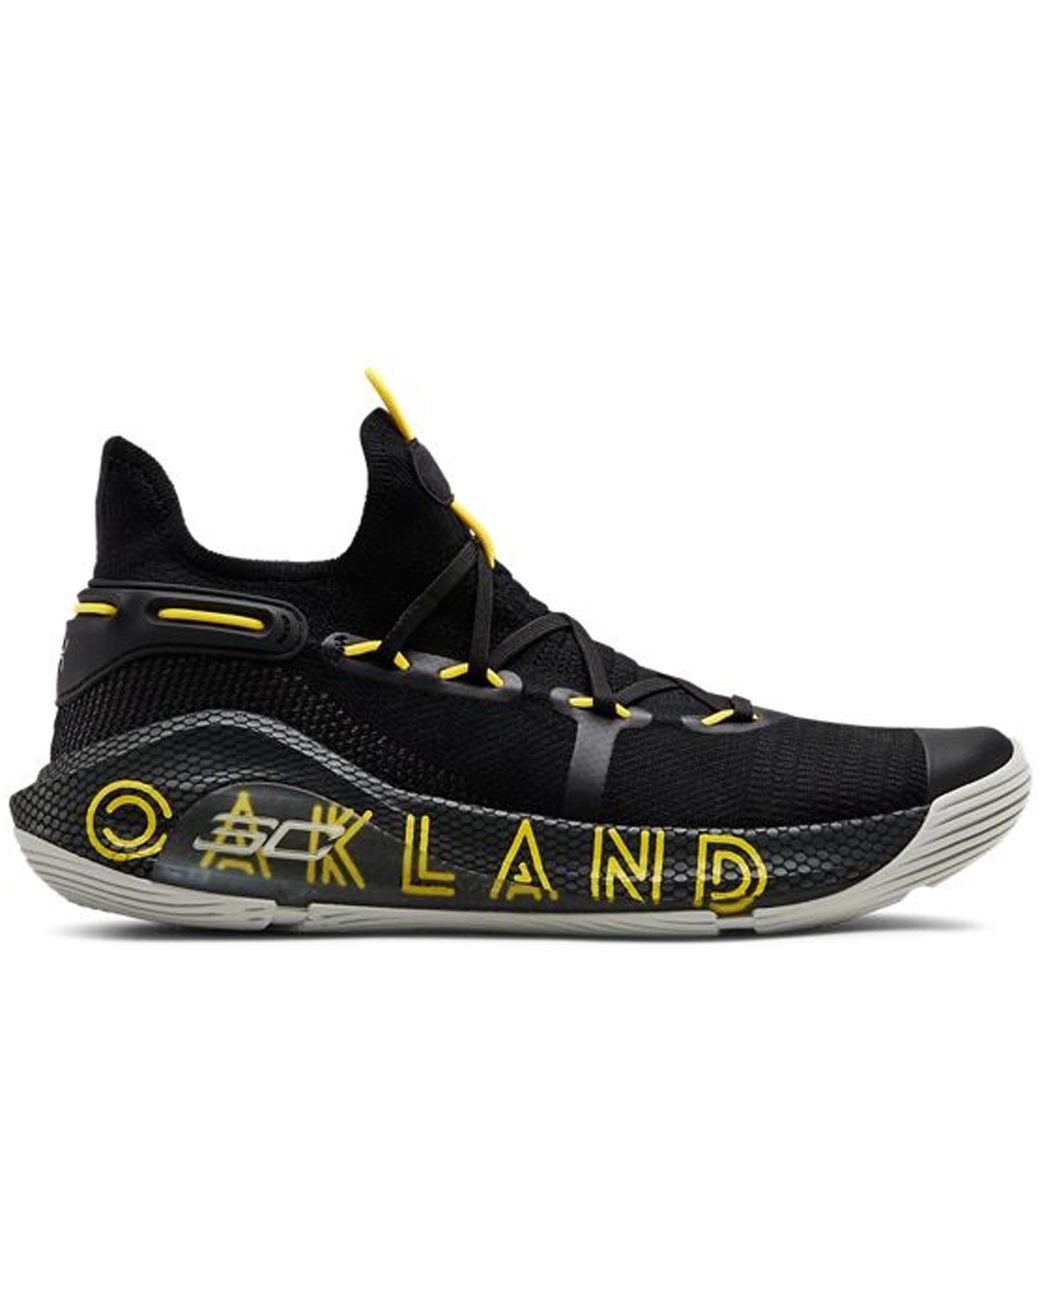 curry 6 thank you oakland